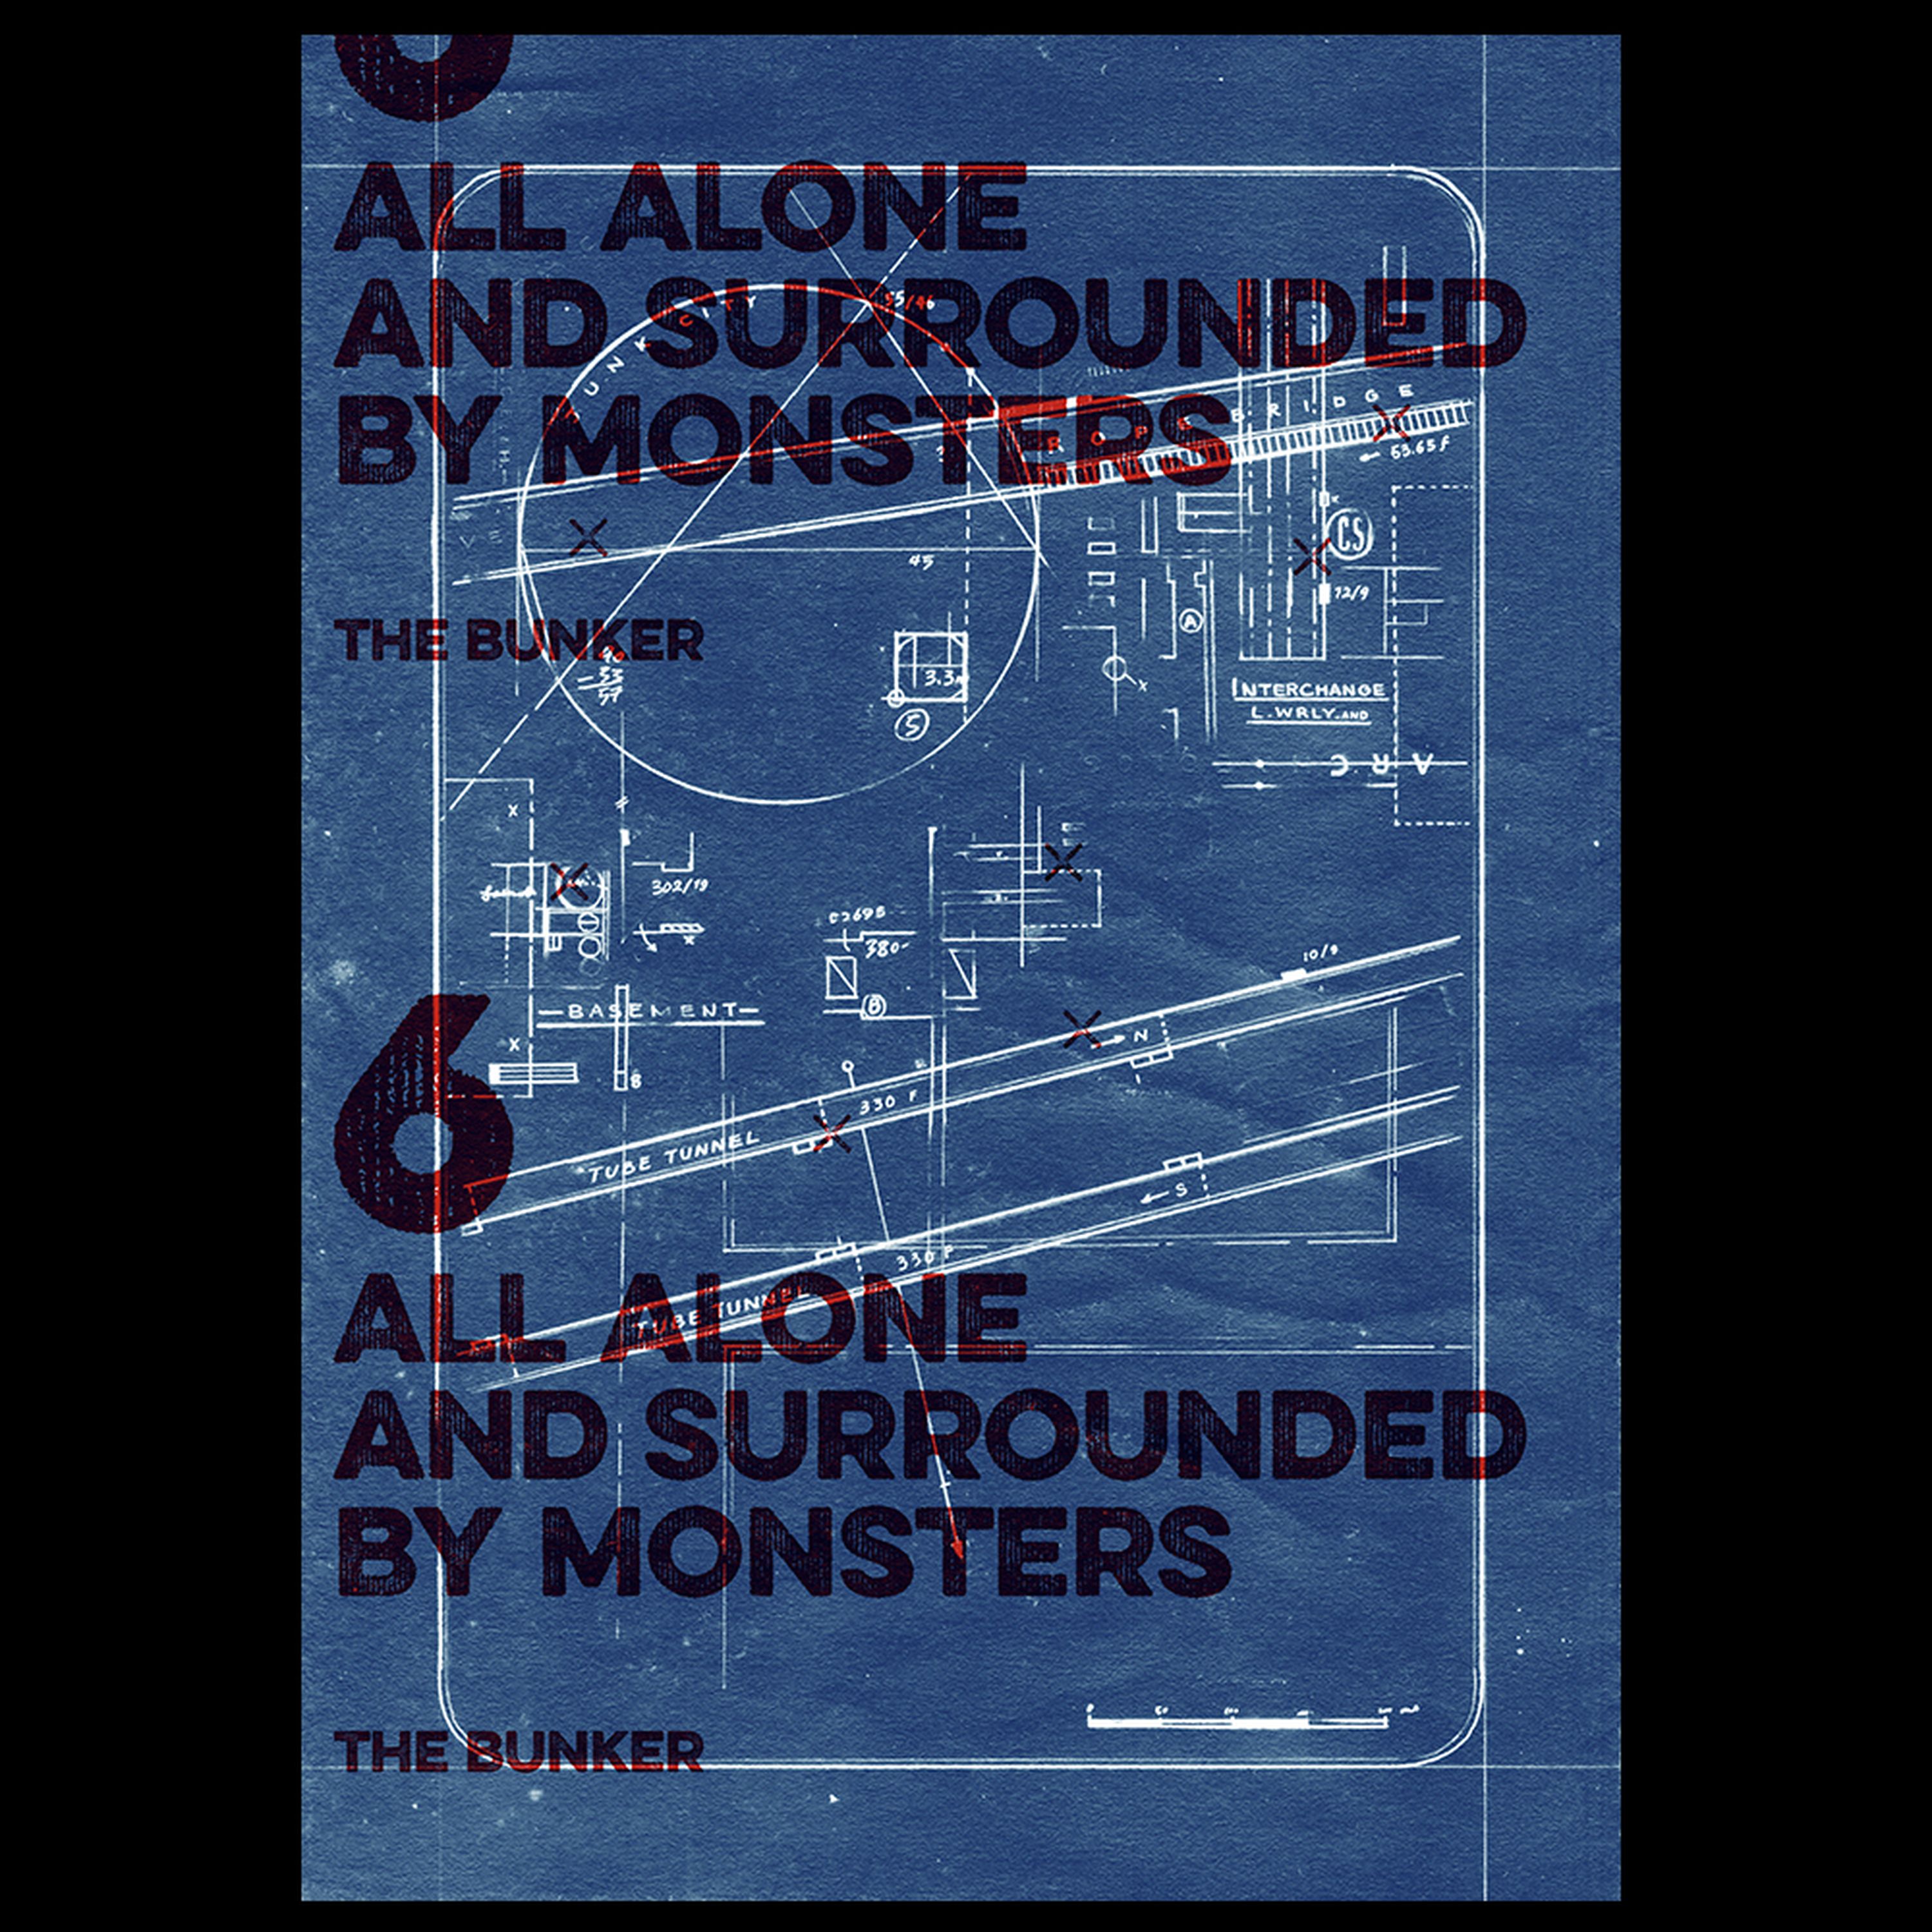 Episode Six – All Alone and Surrounded by Monsters